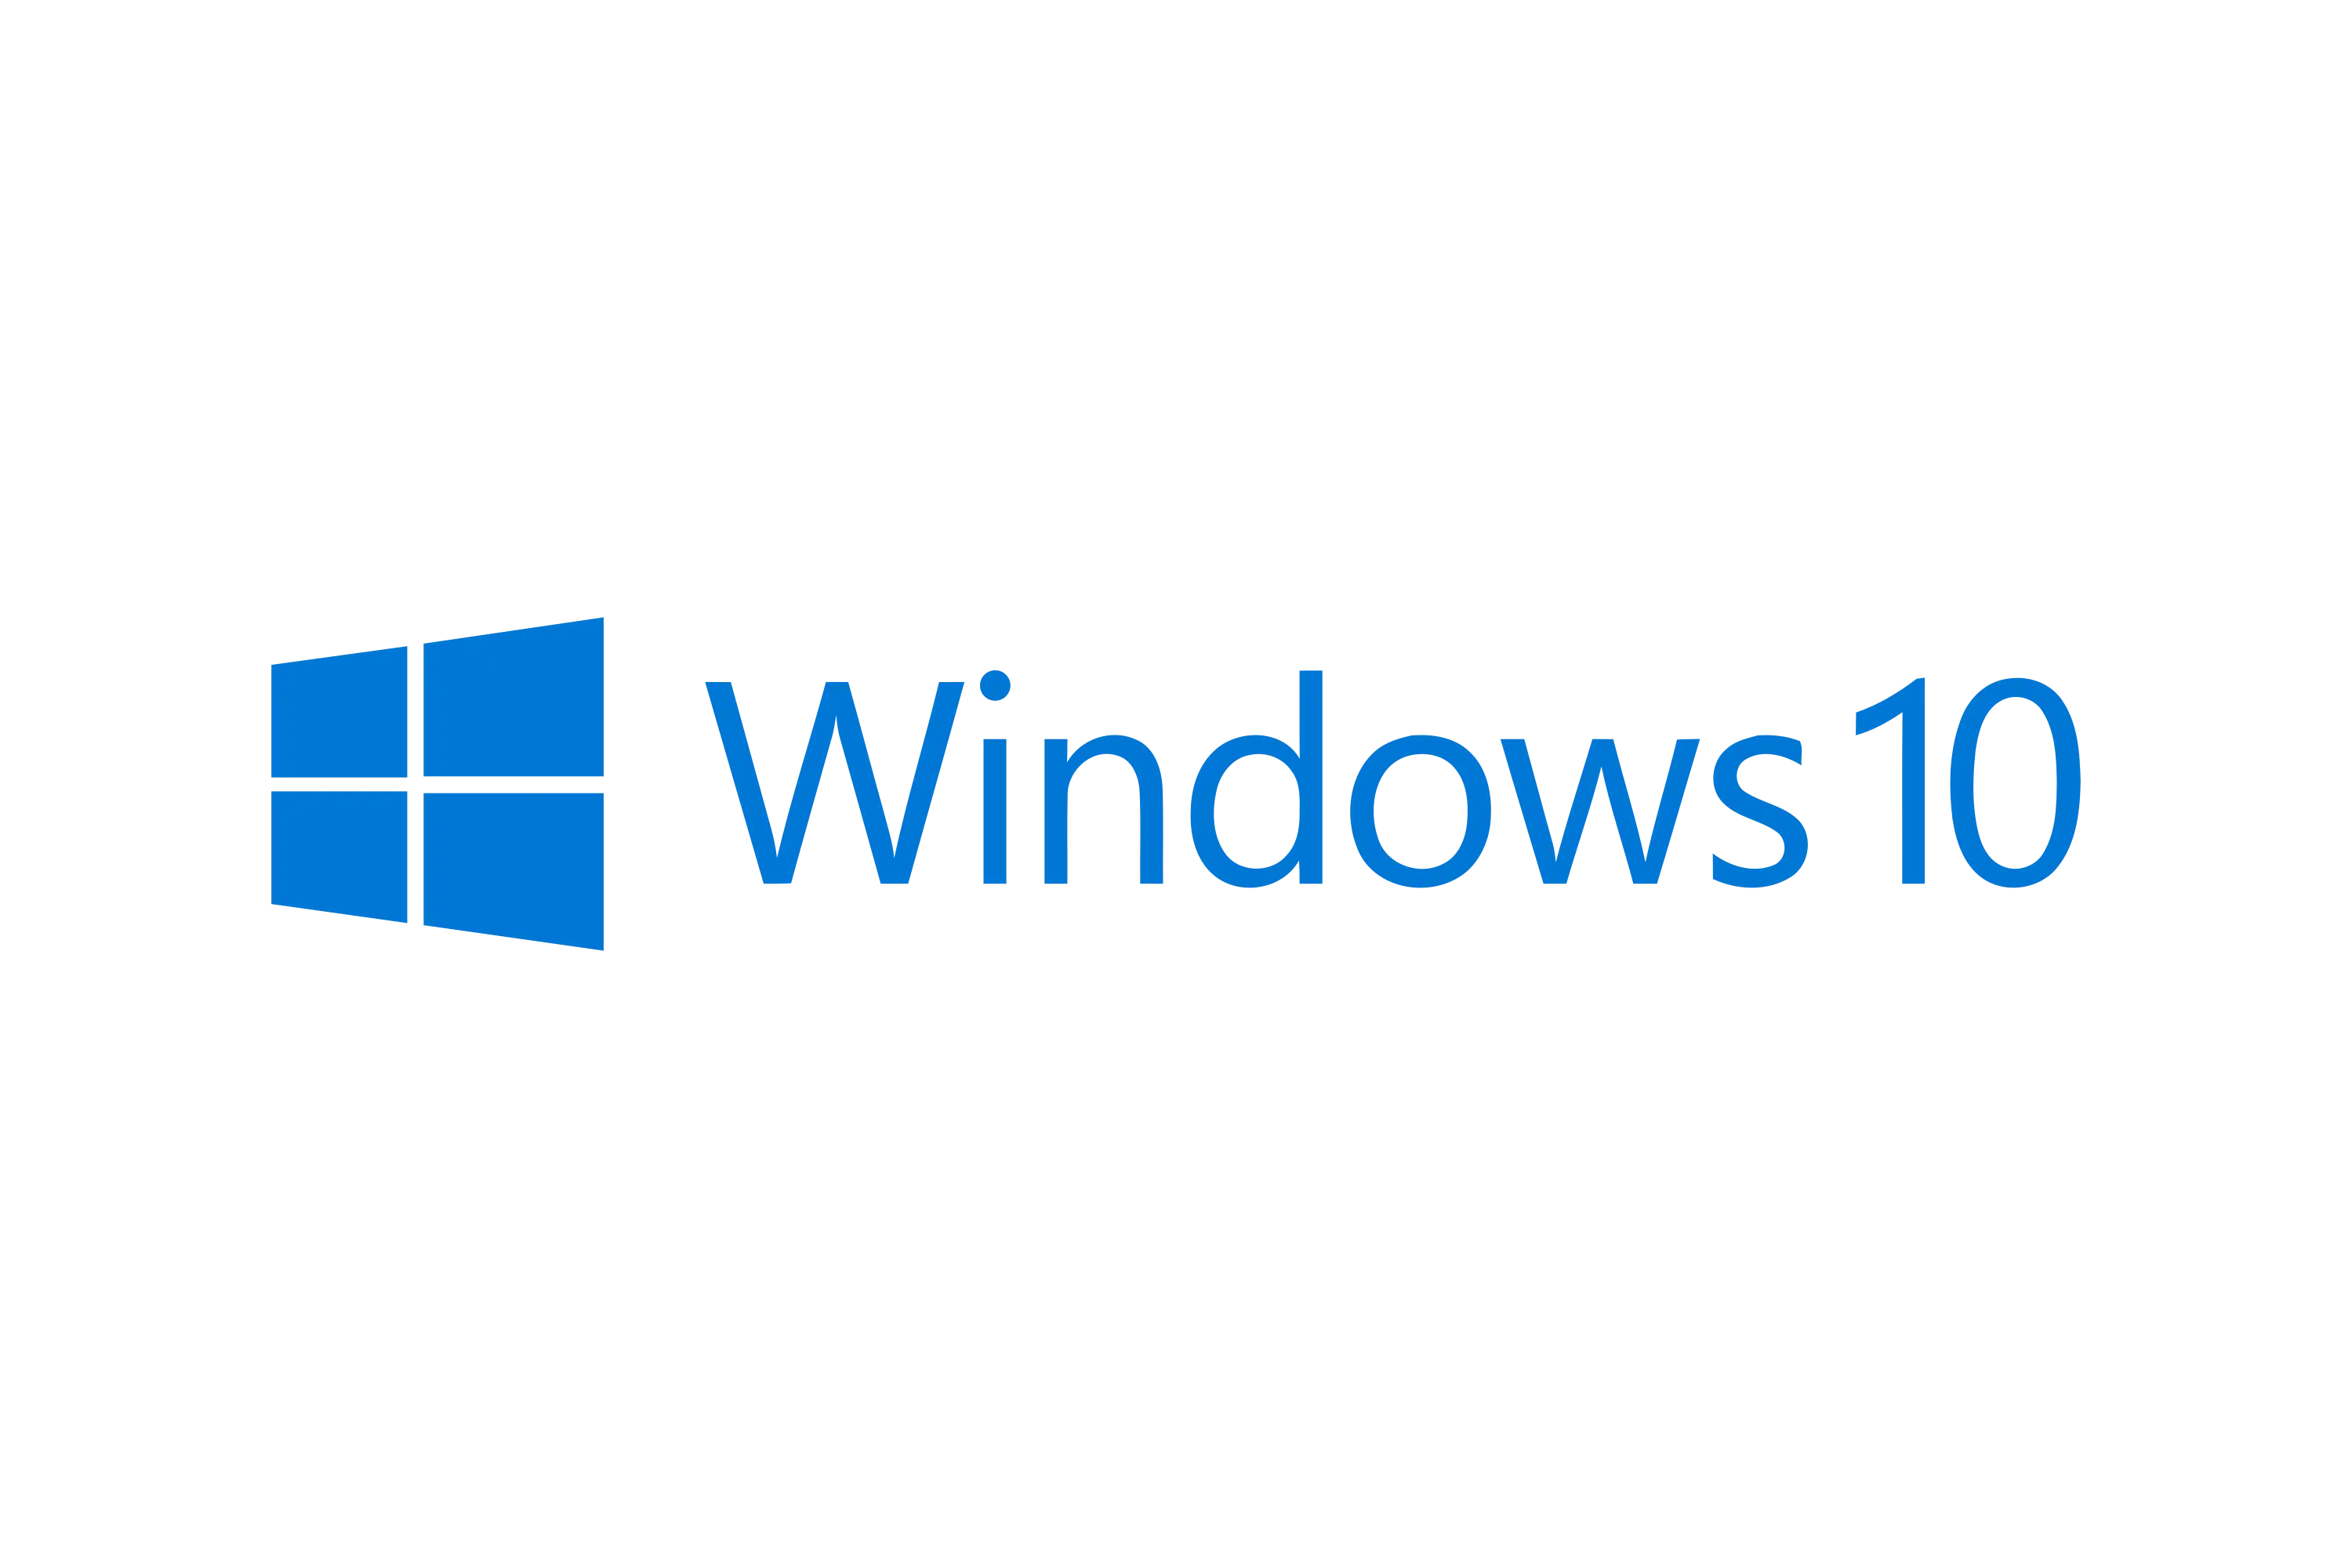 Technogeek can fix your windows 10 issues